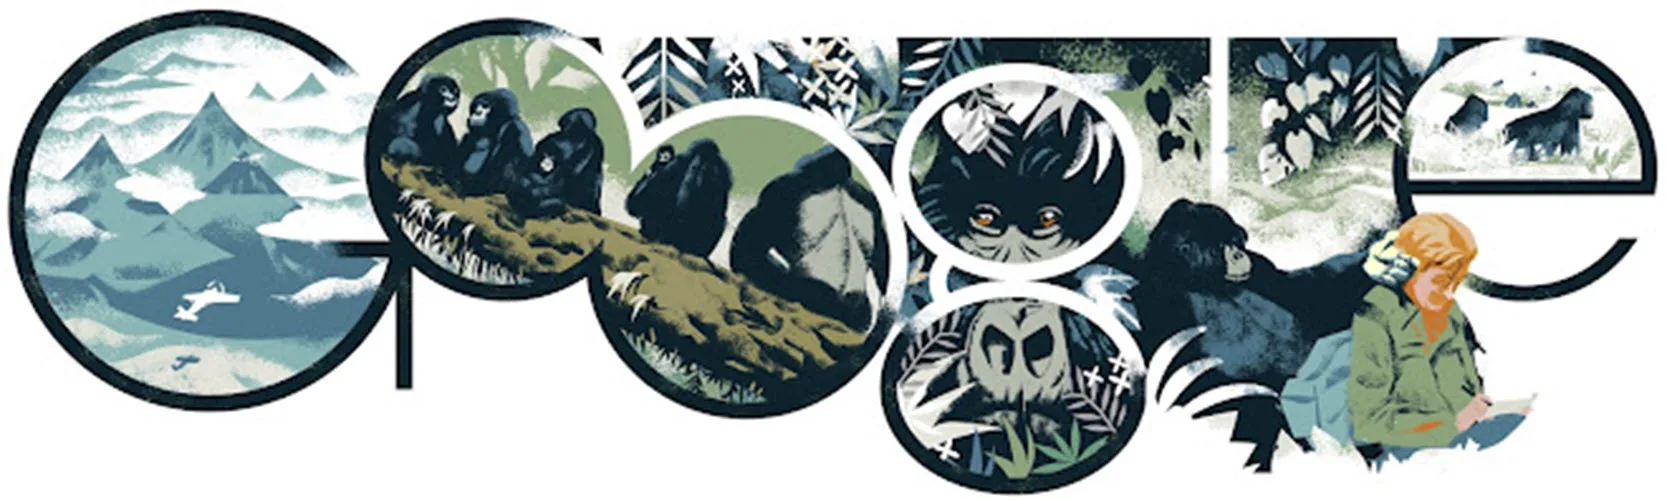 26 December: Tribute to Dian Fossey